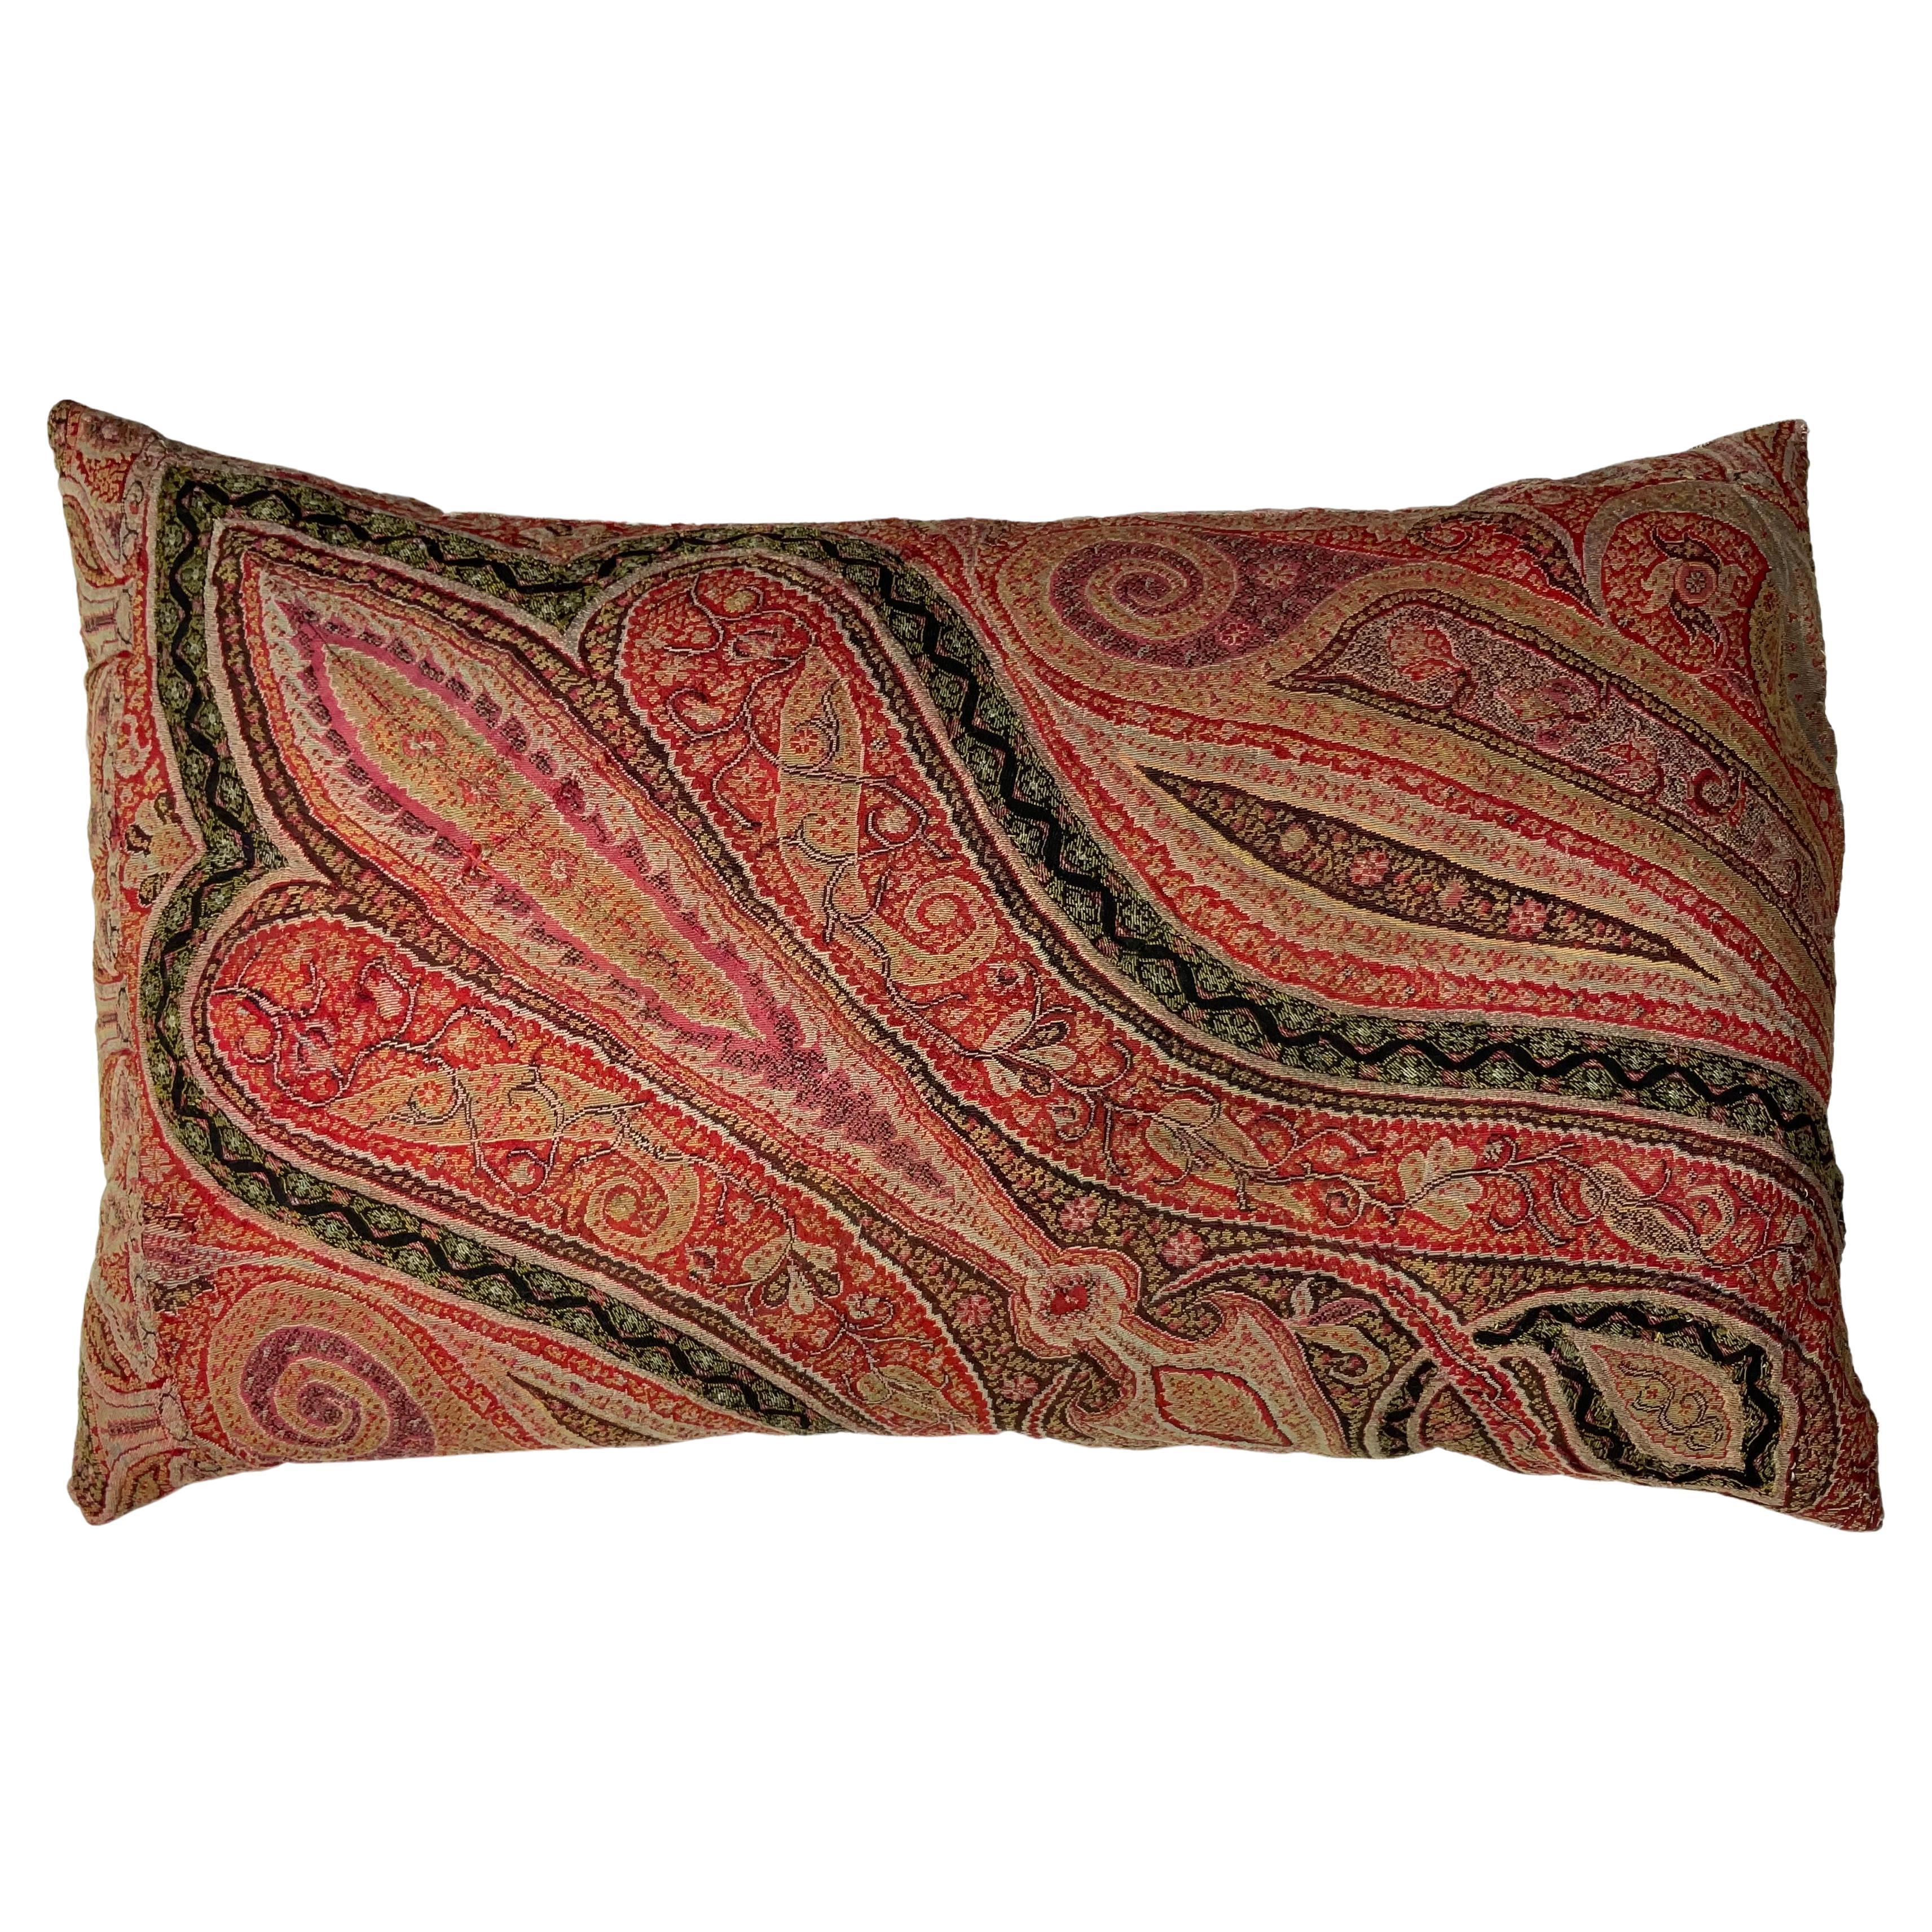 Single Antique Pillow Made from Kashmir Shawl For Sale